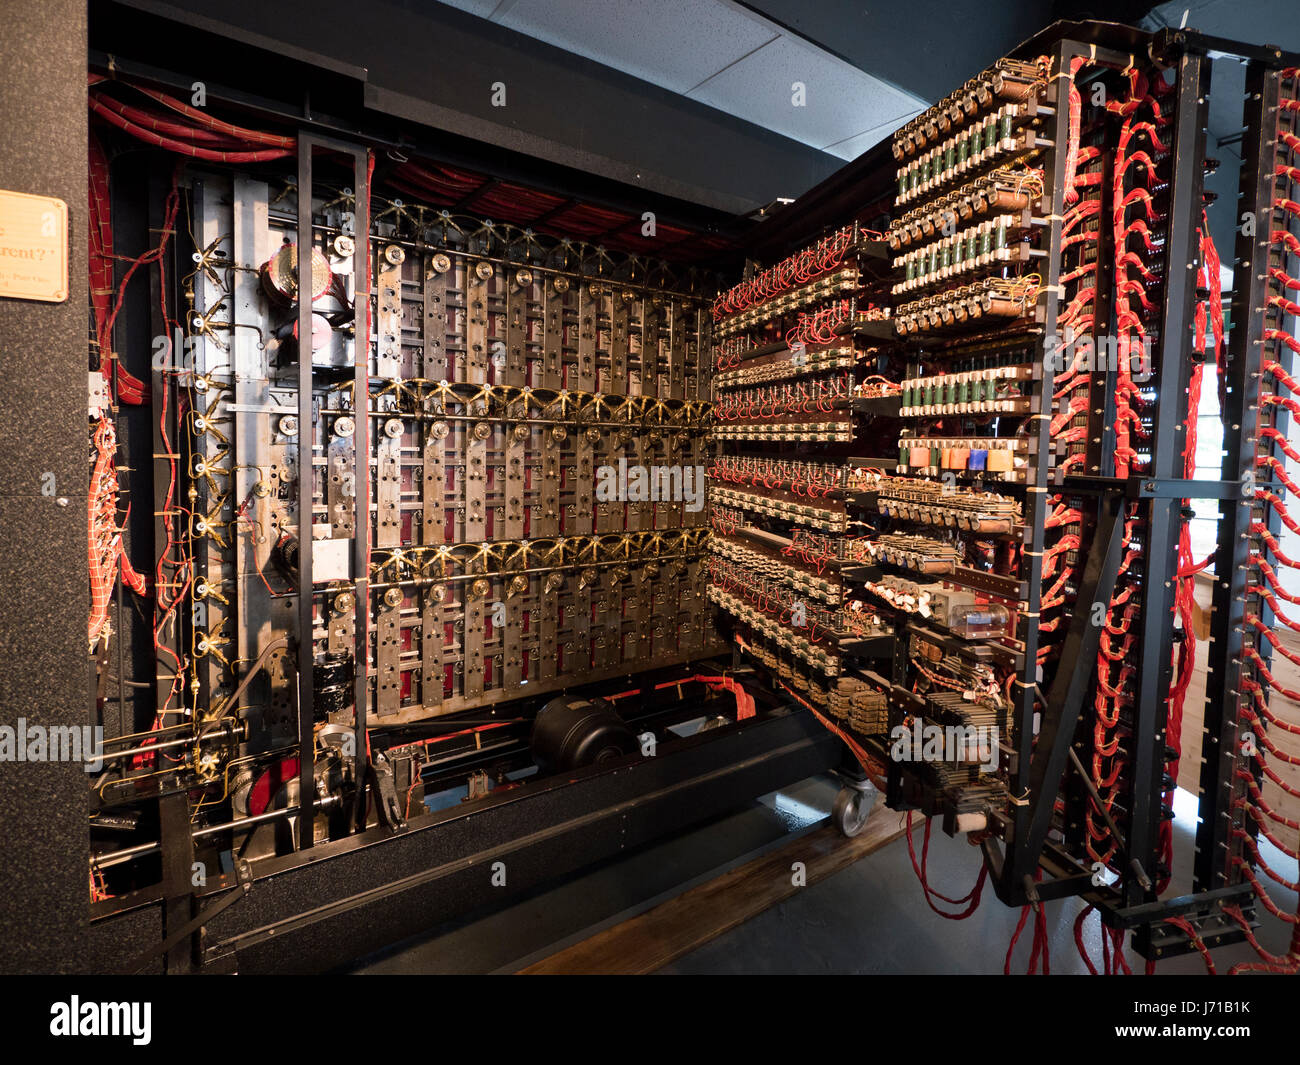 A working recreation of the Turing Machine or Bombe at the home of the WWll codebreakers at Bletchley Park in England. Stock Photo